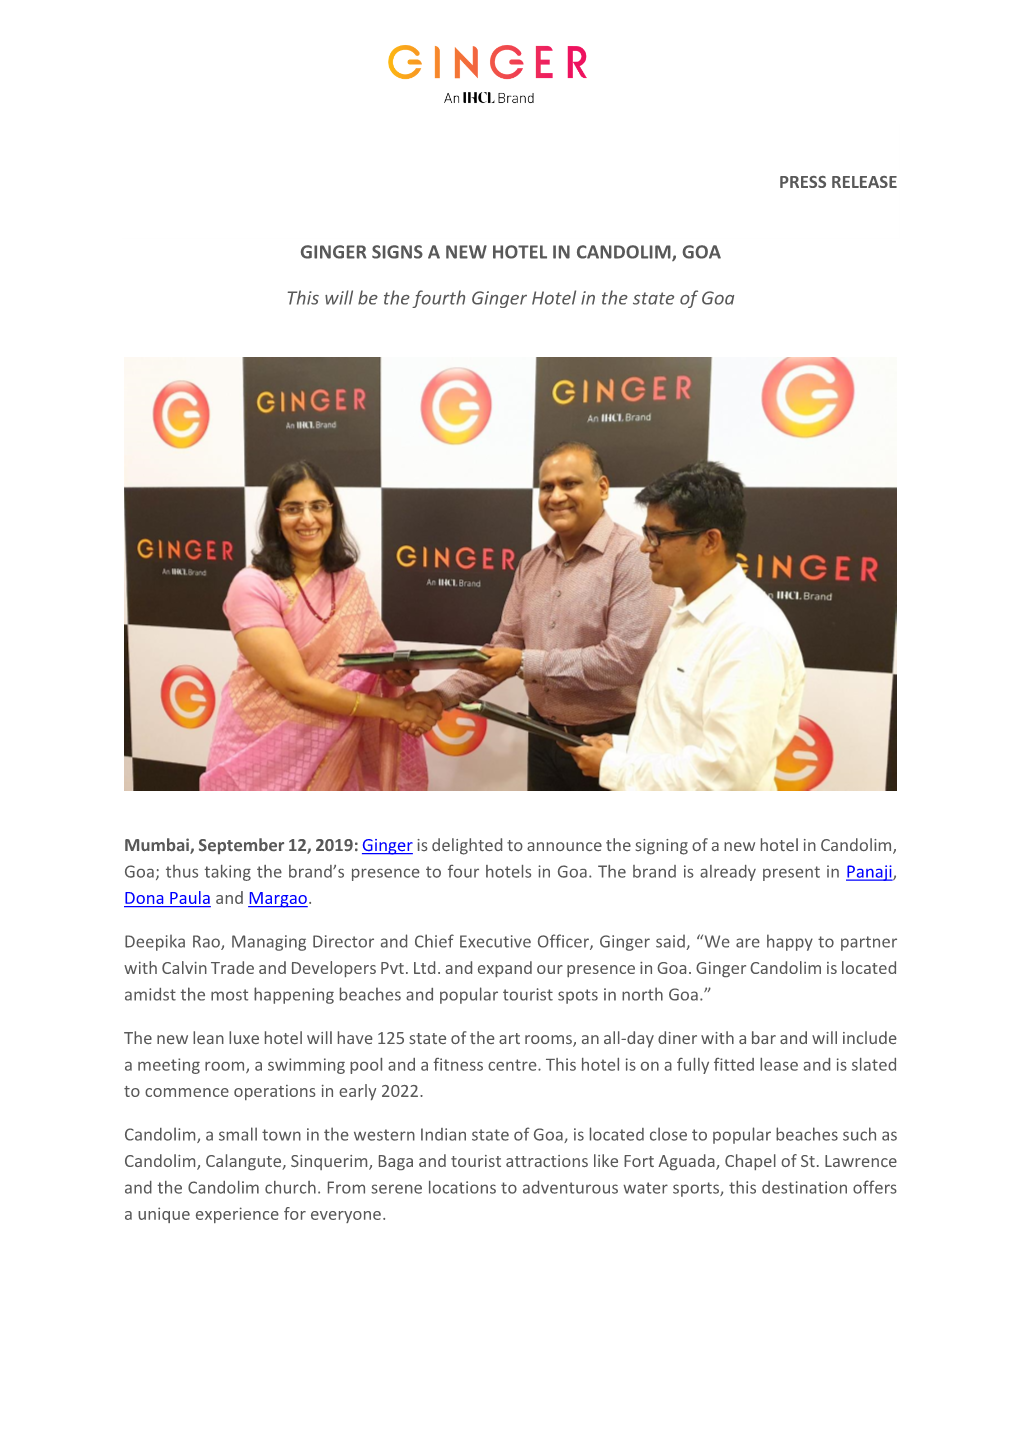 GINGER SIGNS a NEW HOTEL in CANDOLIM, GOA This Will Be The